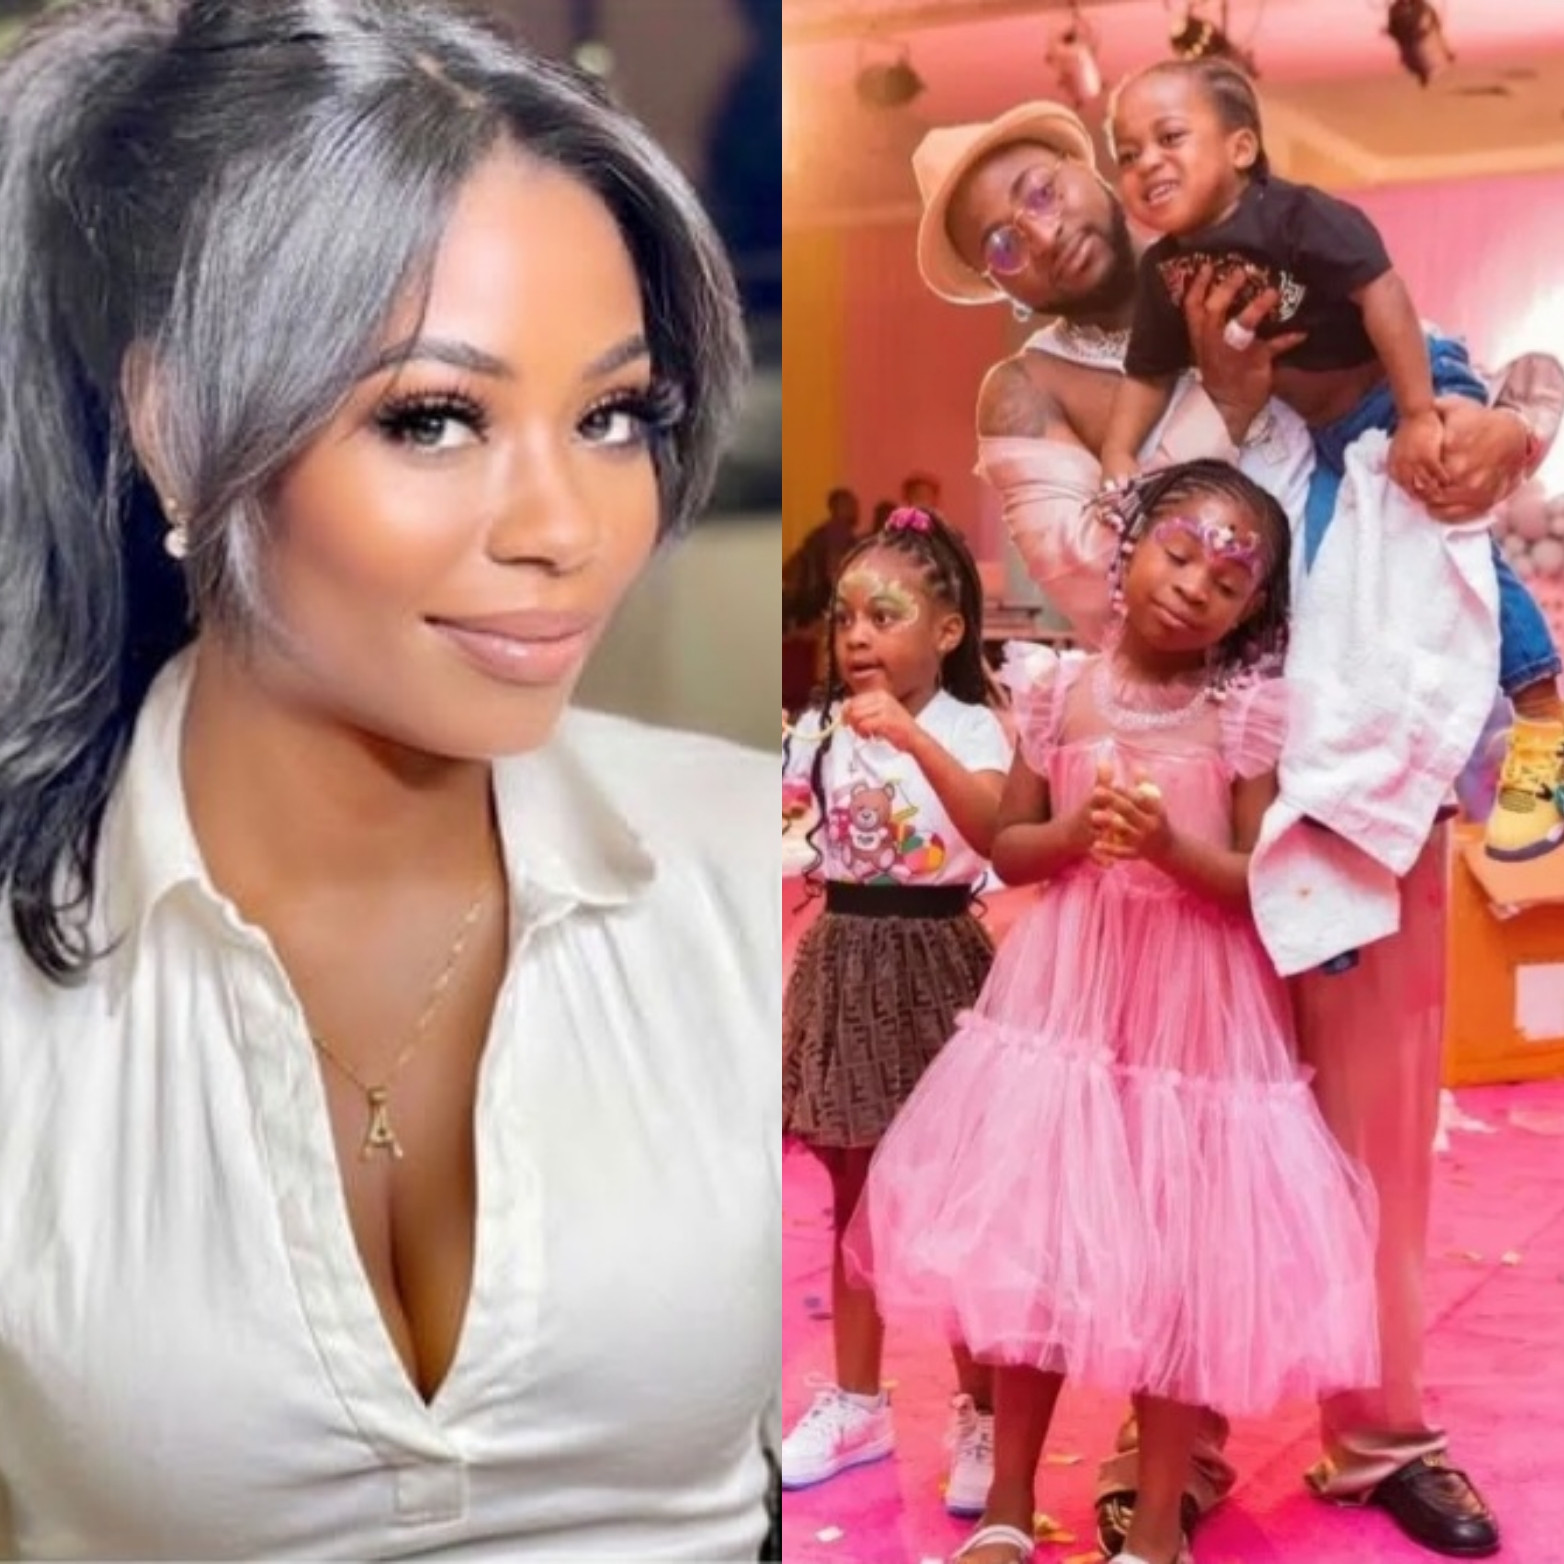 SOPHIA MOMODU APOLOGISES AFTER POSTING PHOTO OF DAVIDO AND THREE OF HIS KIDS TO CELEBRATE HIM ON 30TH BIRTHDAY